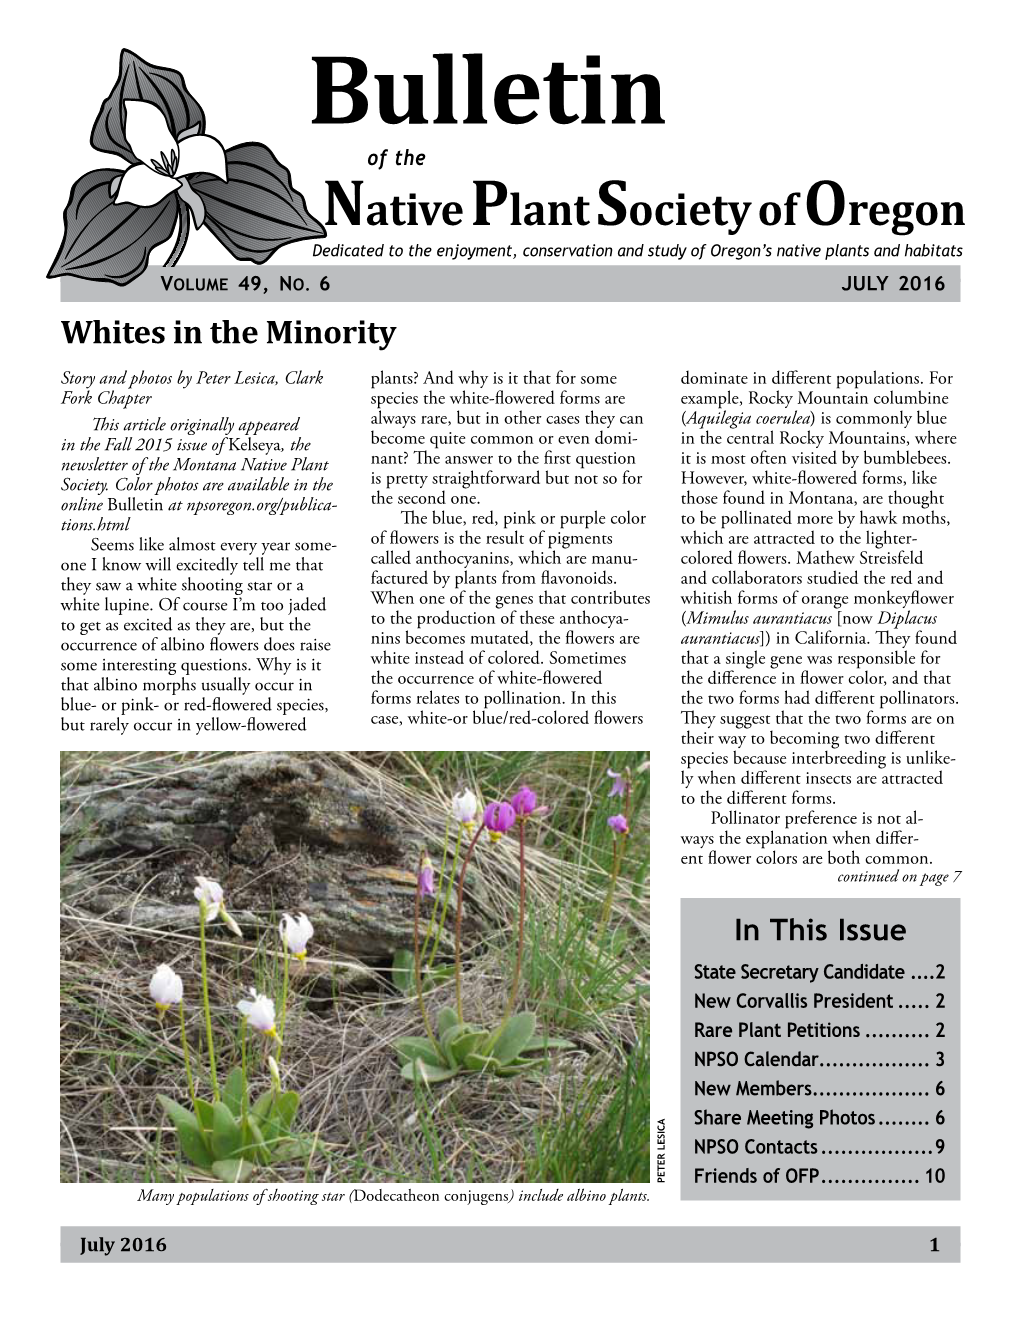 Bulletin of the Native Plant Society of Oregon Dedicated to the Enjoyment, Conservation and Study of Oregon’S Native Plants and Habitats